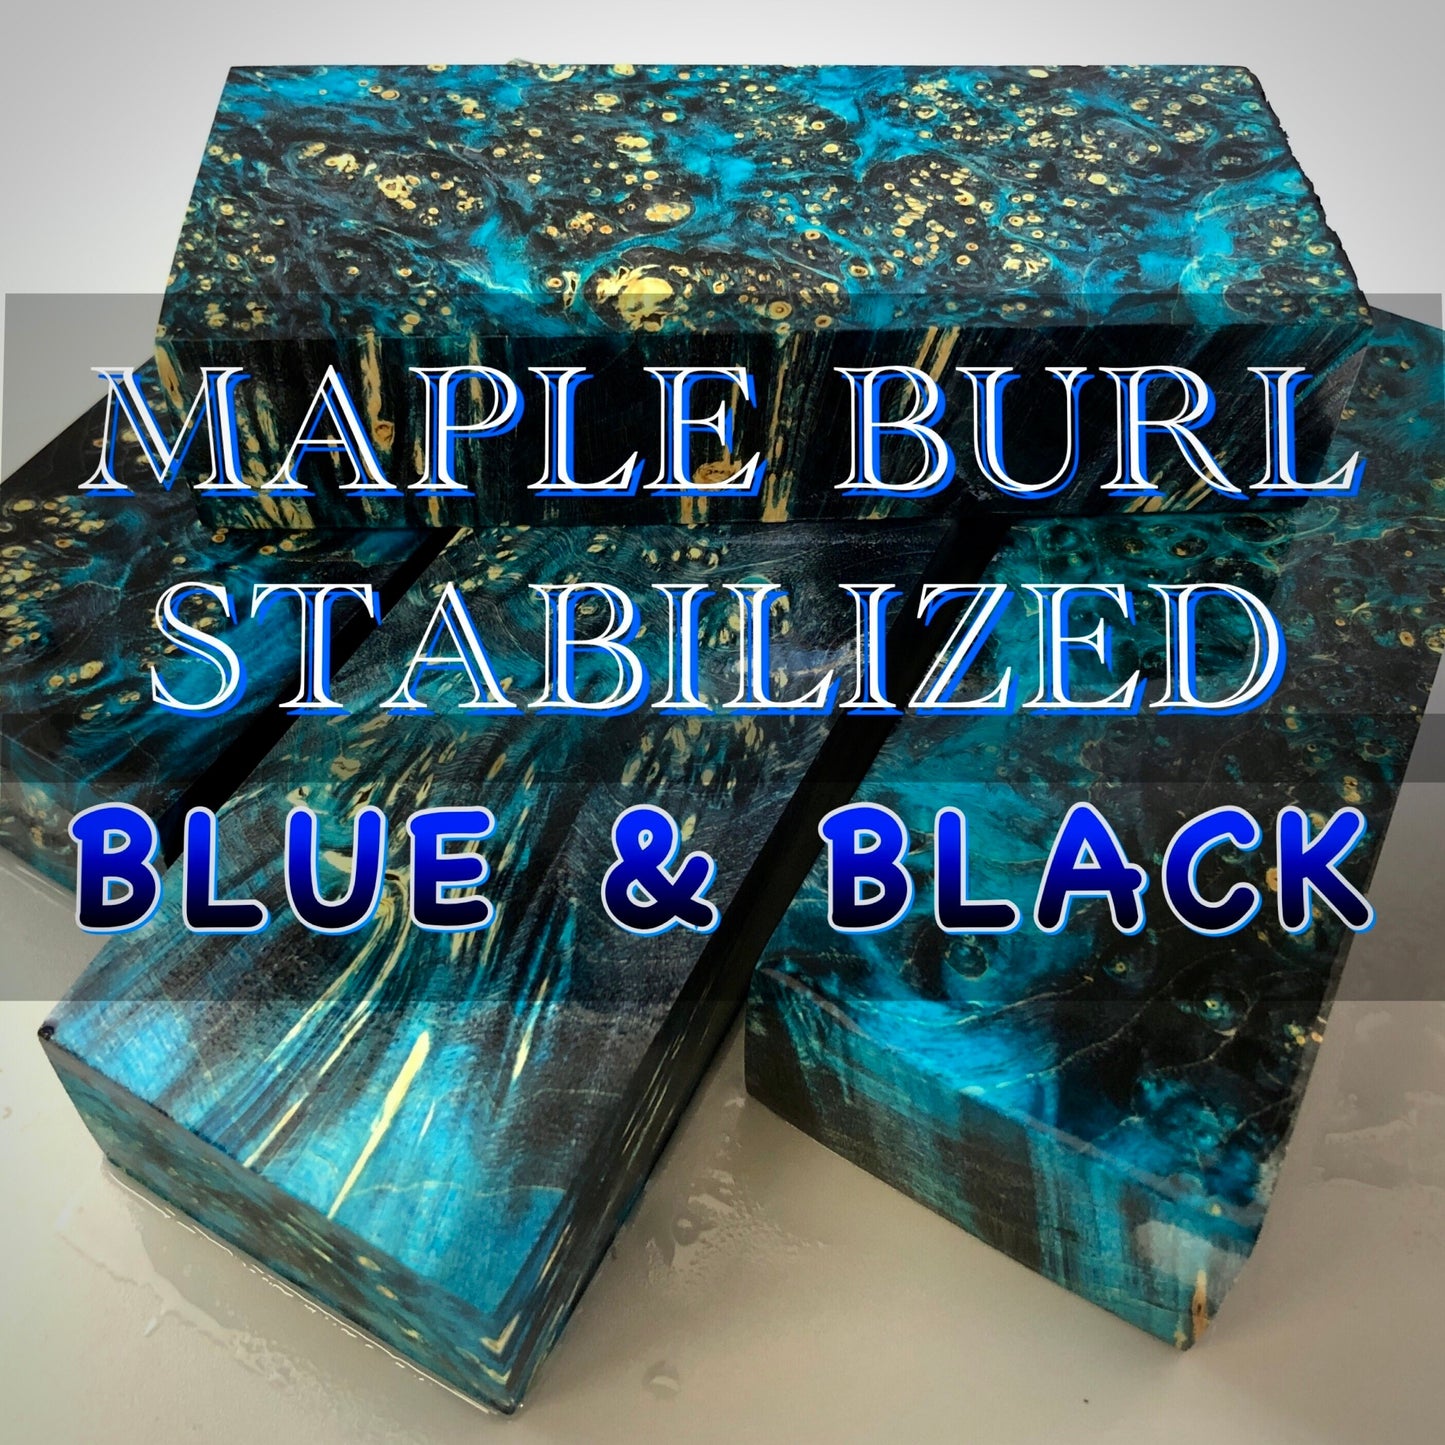 MAPLE BURL, Stabilized Blanks, Blue & Black Colors. Woodworking, Crafting. France Stock.